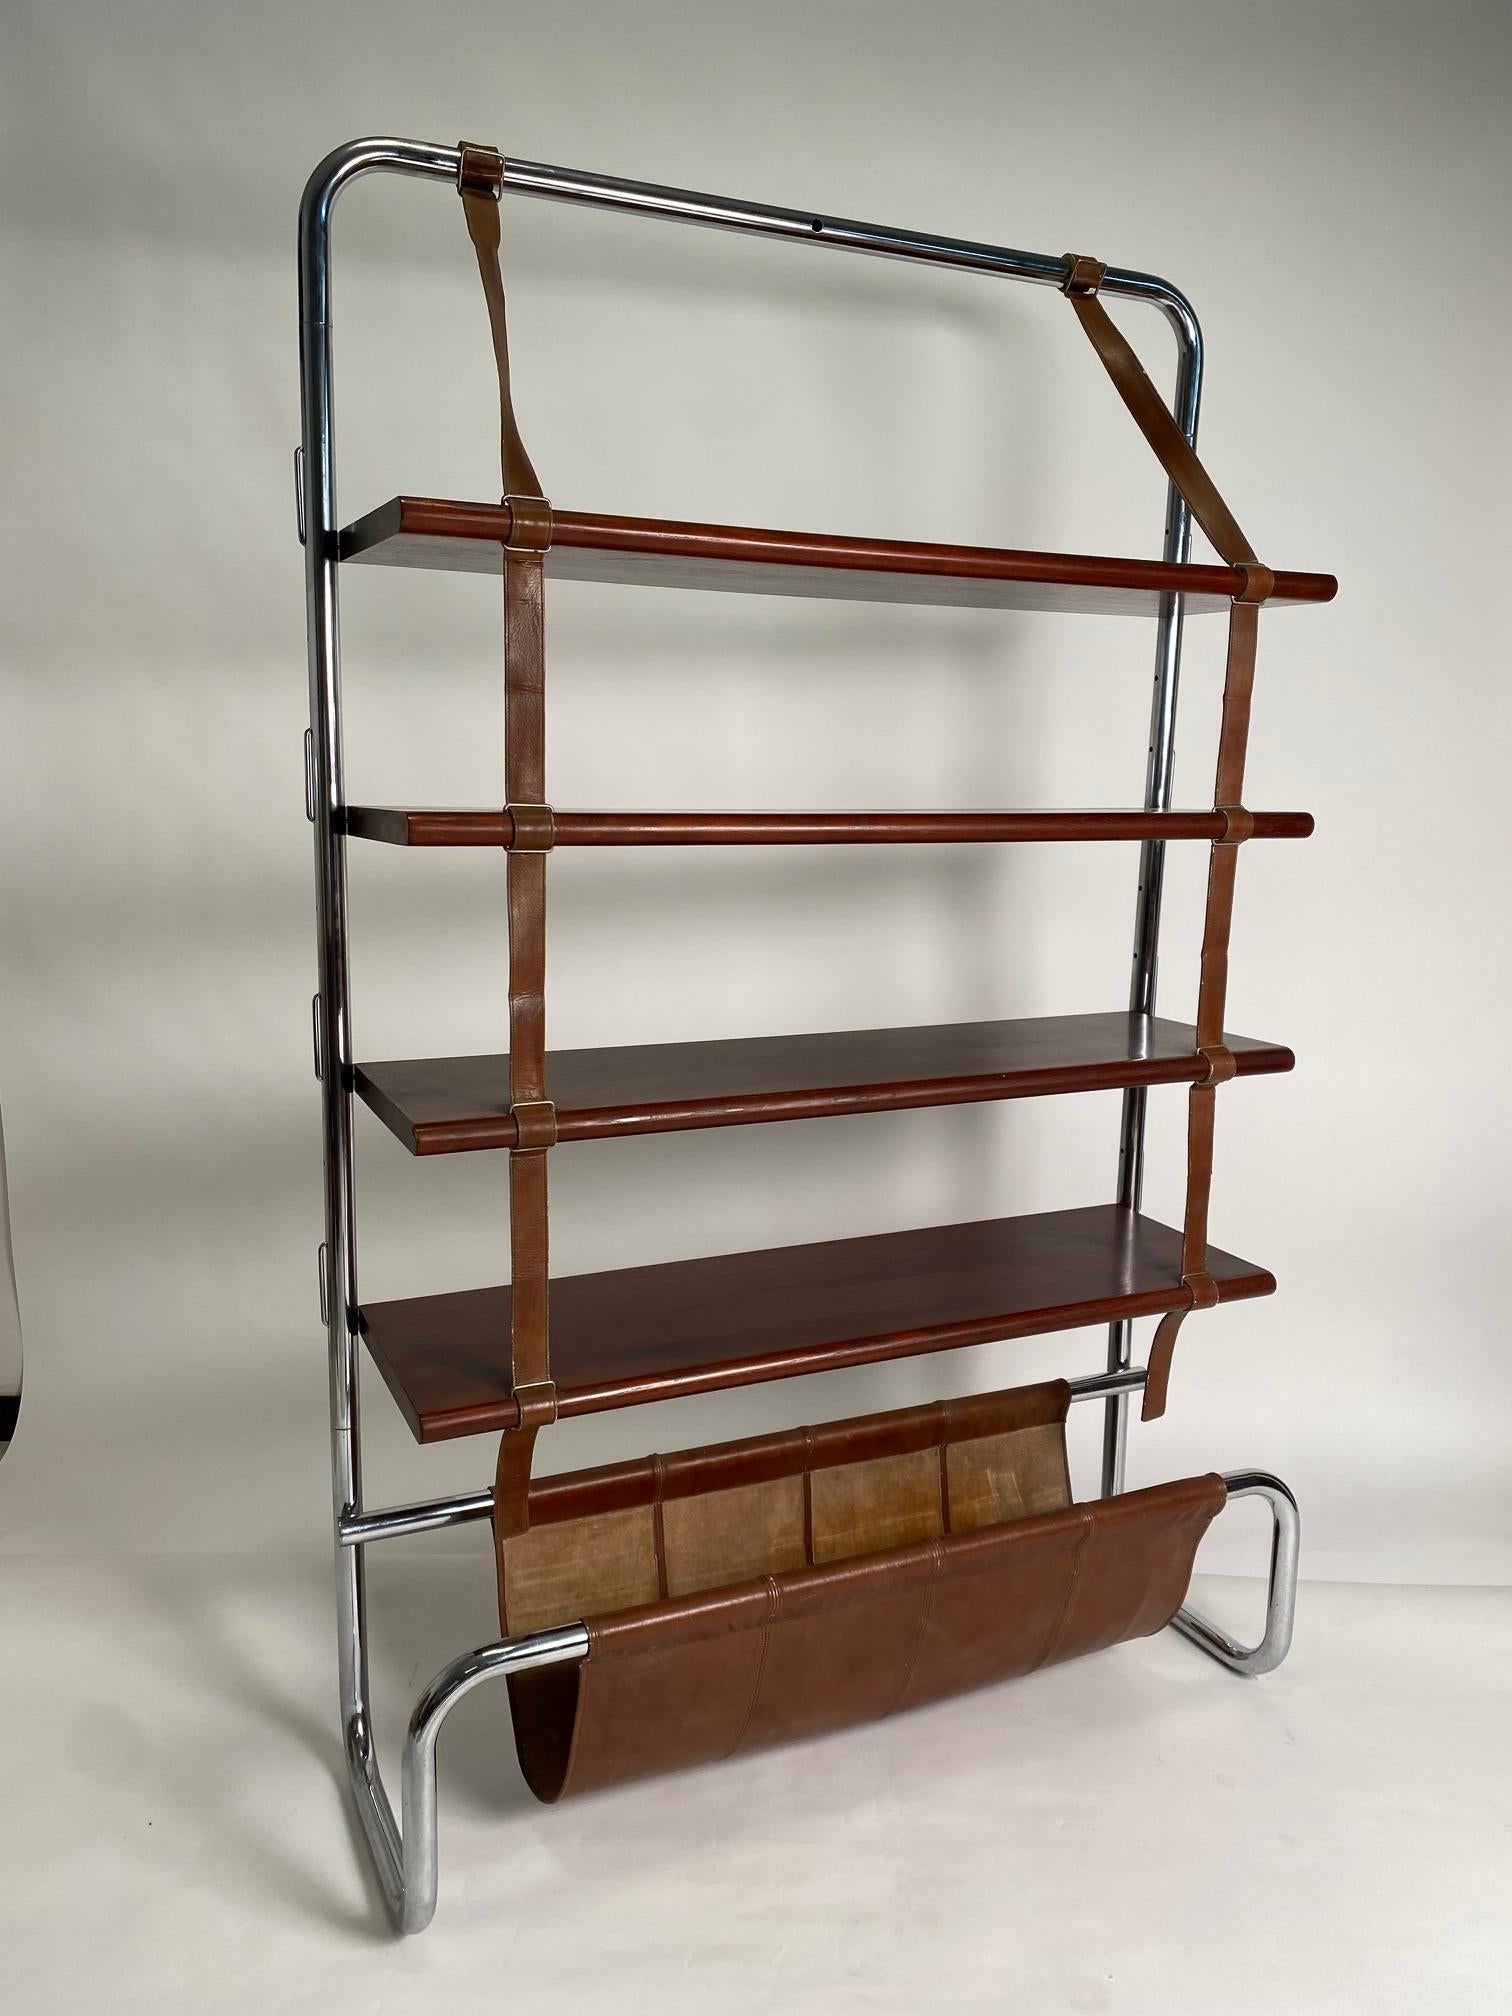 Luigi Massoni (Milan 1930), Jumbo Line Bookcase for Poltrona Frau, Italy, 1971

One of the most refined and original bookcases in the history of design, it combines an essential tubular metal structure and wooden shelves supported by beautiful